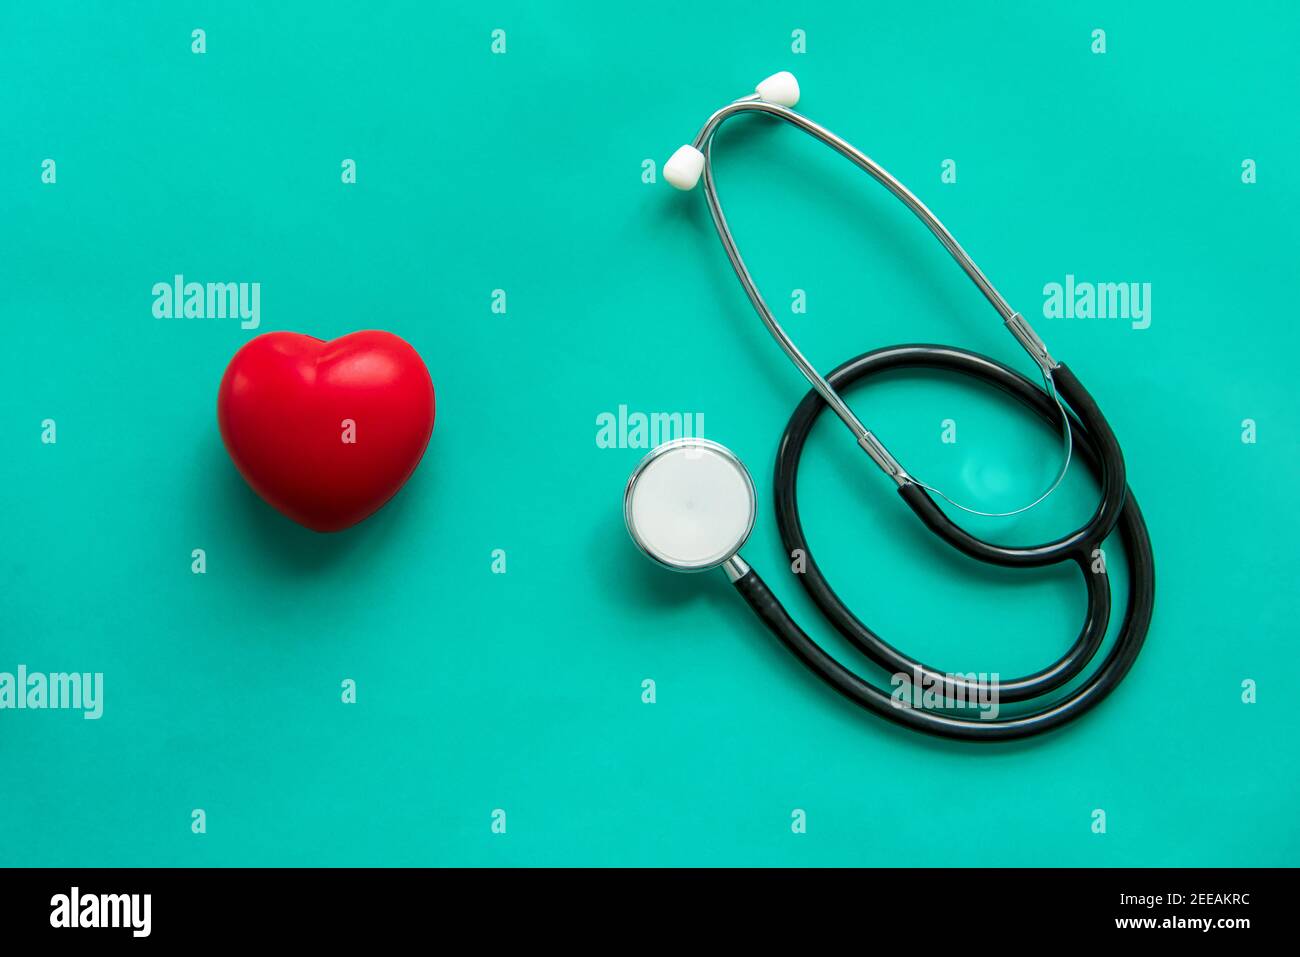 Red heart shape ball with stethoscope on green background, health care and medical concept Stock Photo